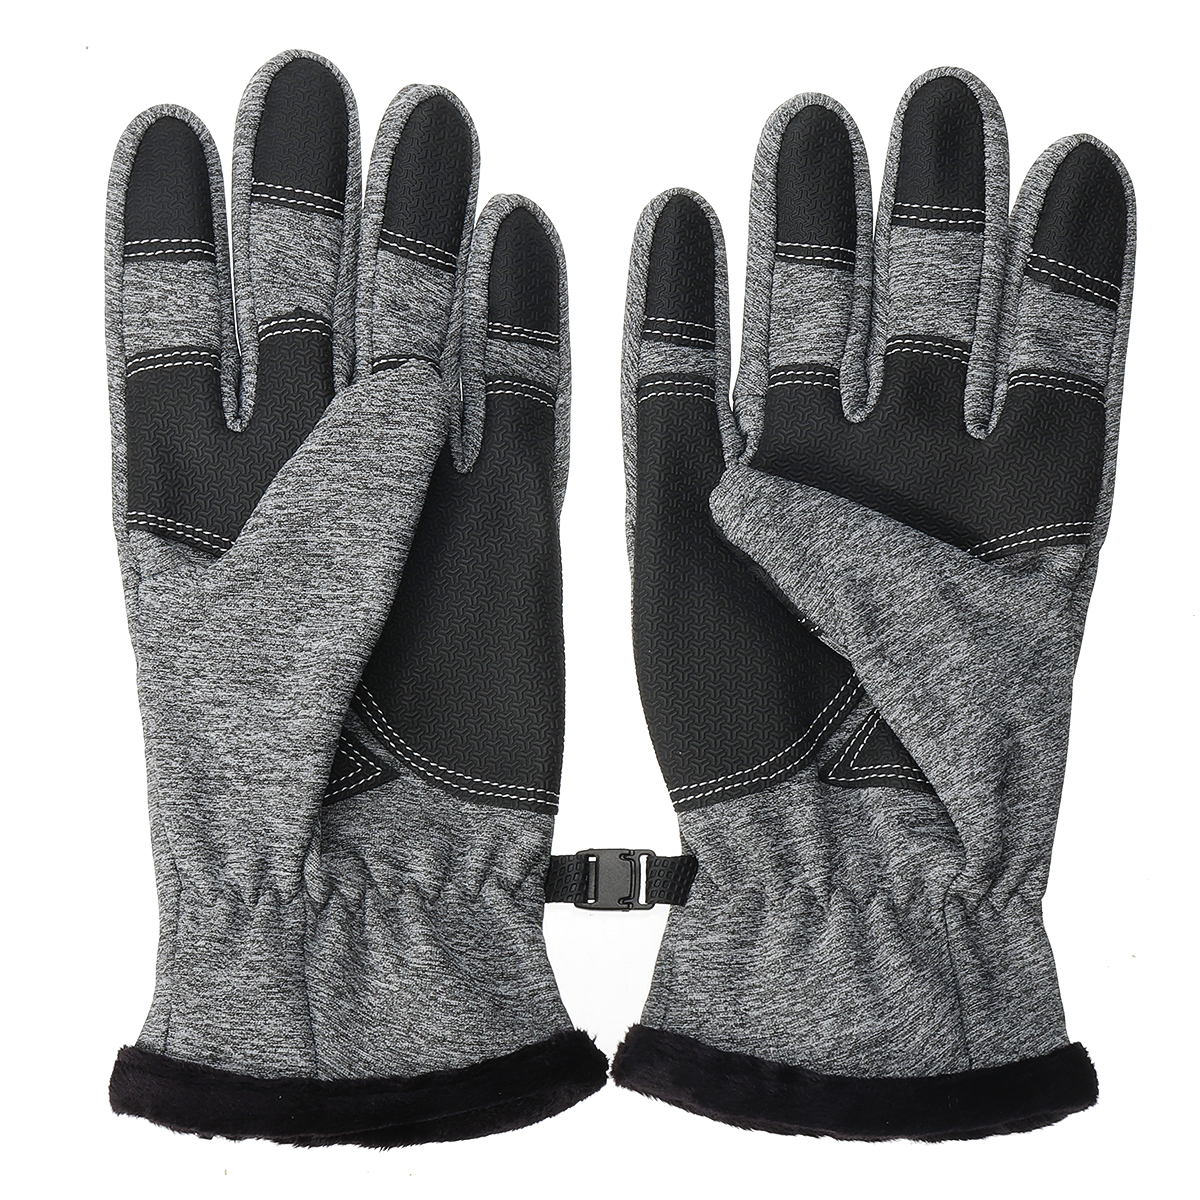 XL-Size-Winter-Warm-Waterproof-Windproof-Anti-Slip-Touch-Screen-Outdoors-Motorcycle-Riding-Gloves-1856137-4